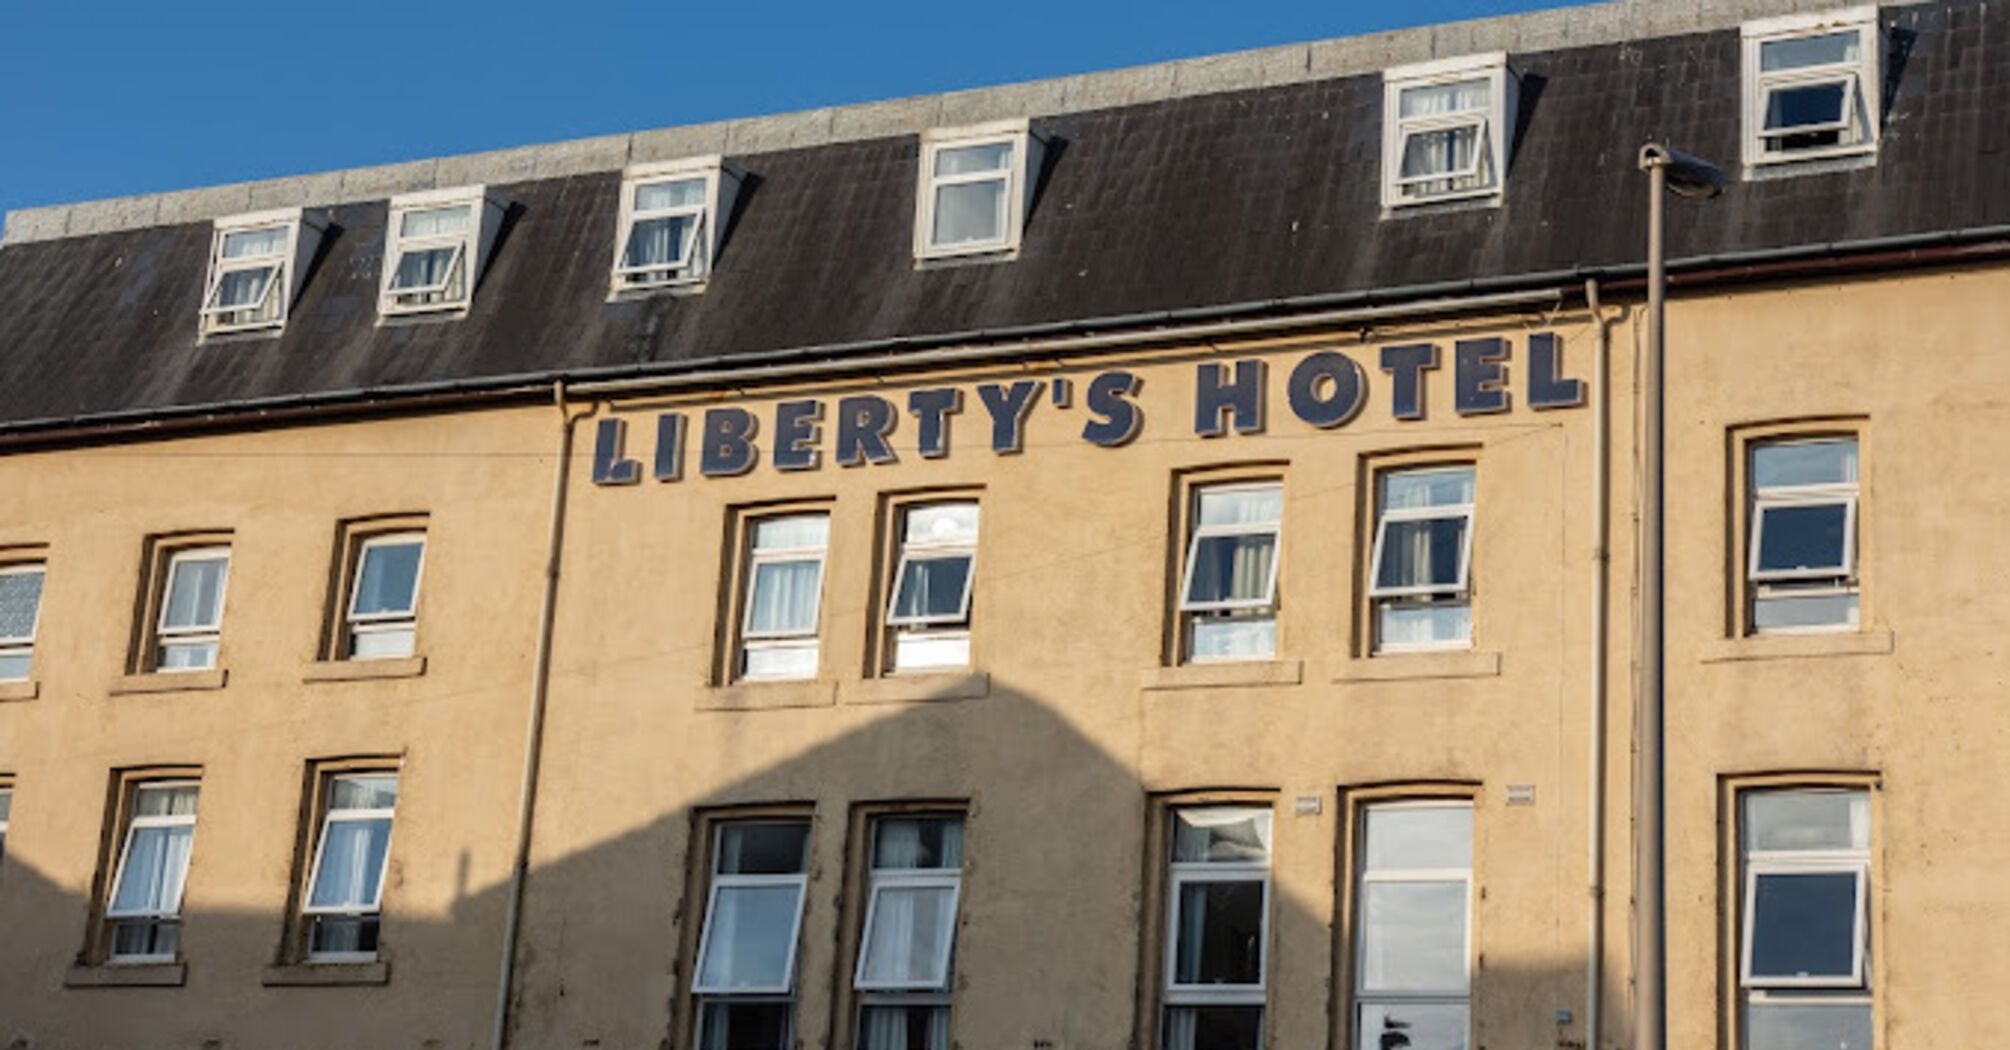 Liberty's Hotel in Blackpool, England, has been sold: What will change